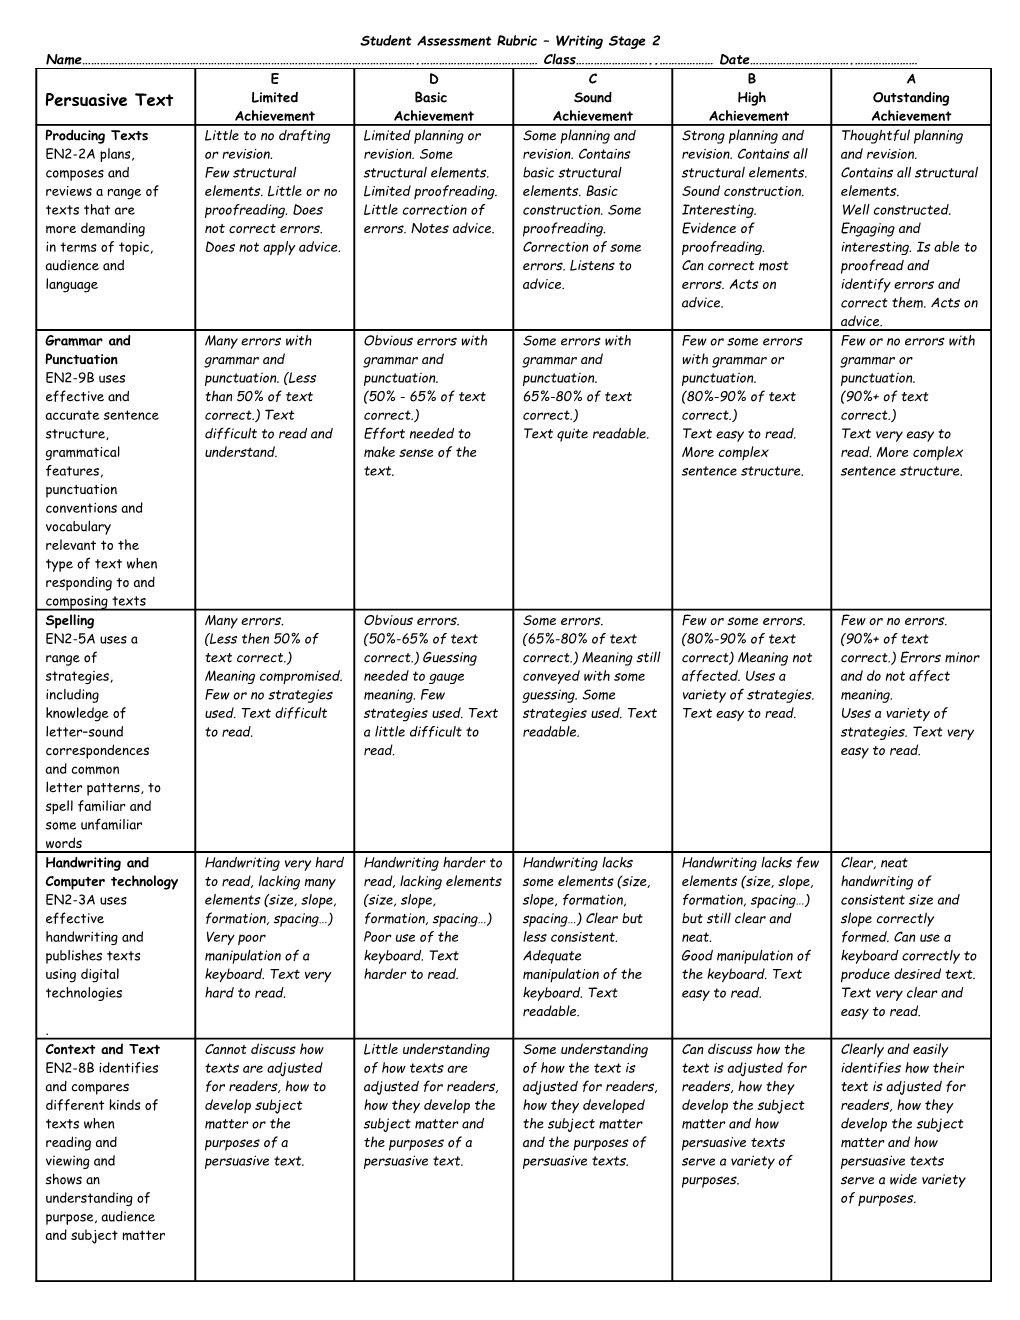 Student Assessment Rubric Writing Early Stage 1 DRAFT